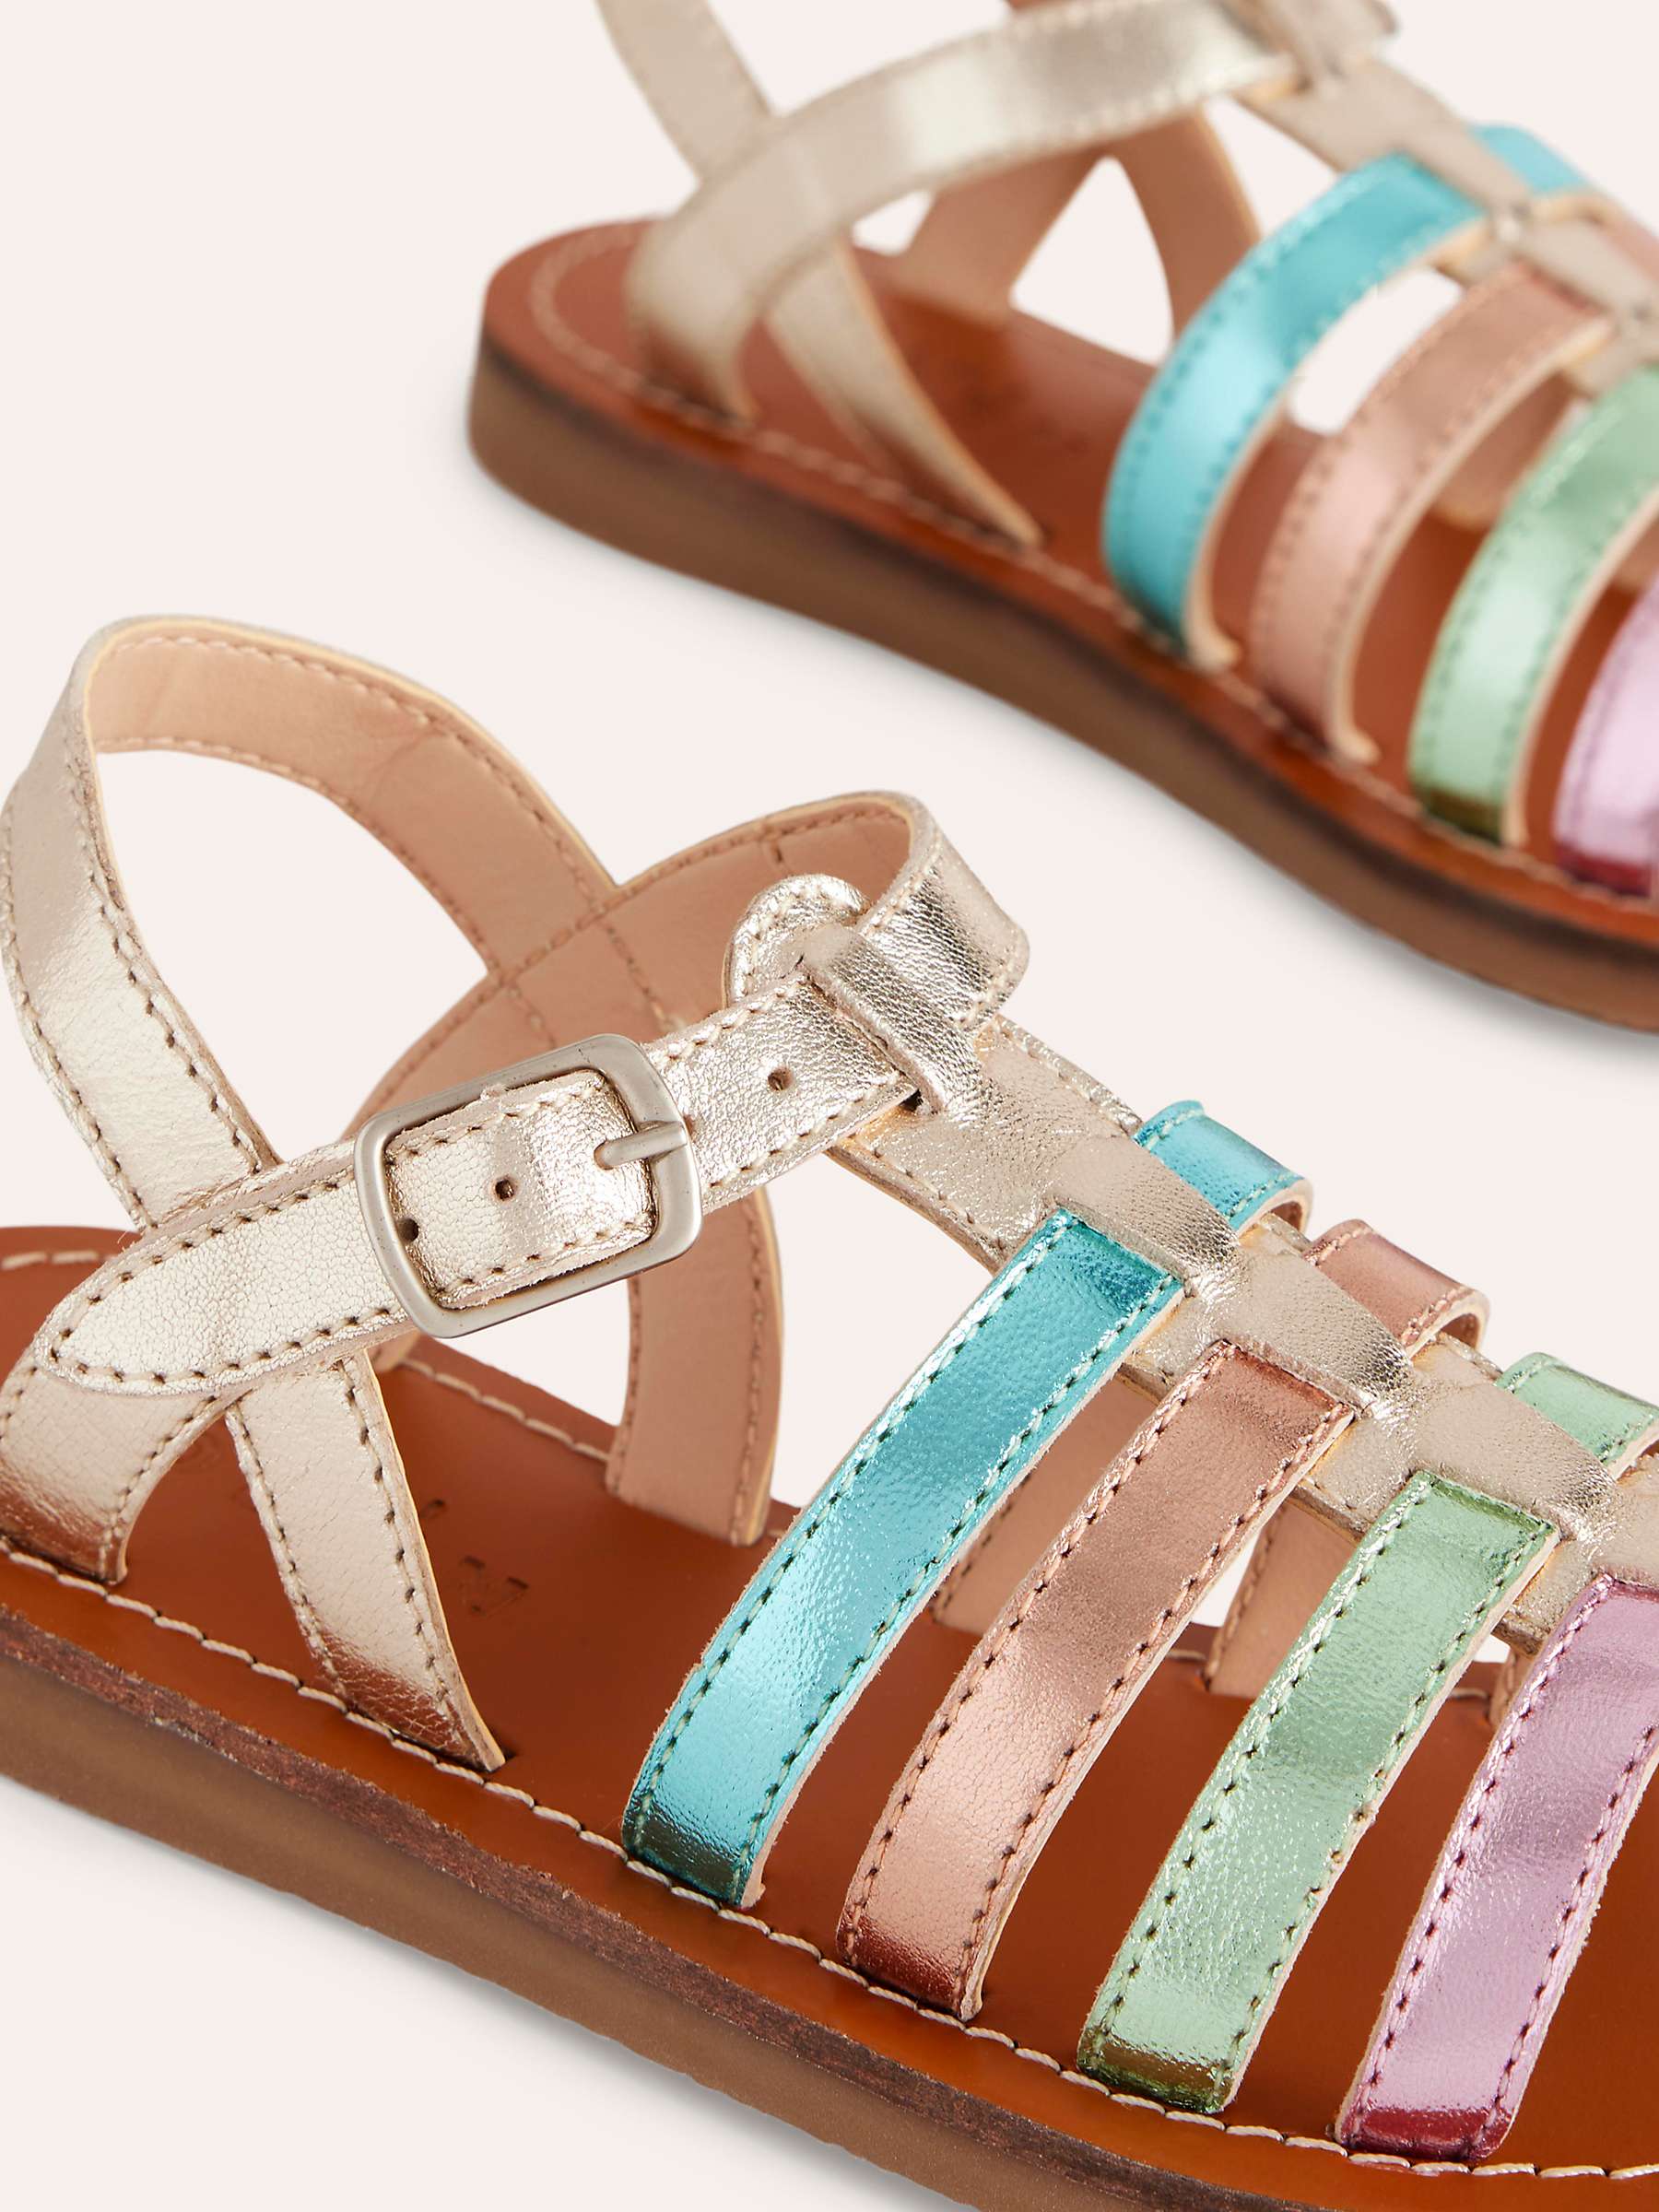 Buy Mini Boden Kids' Leather Ombre Metallic Strappy Sandals, Multi Online at johnlewis.com